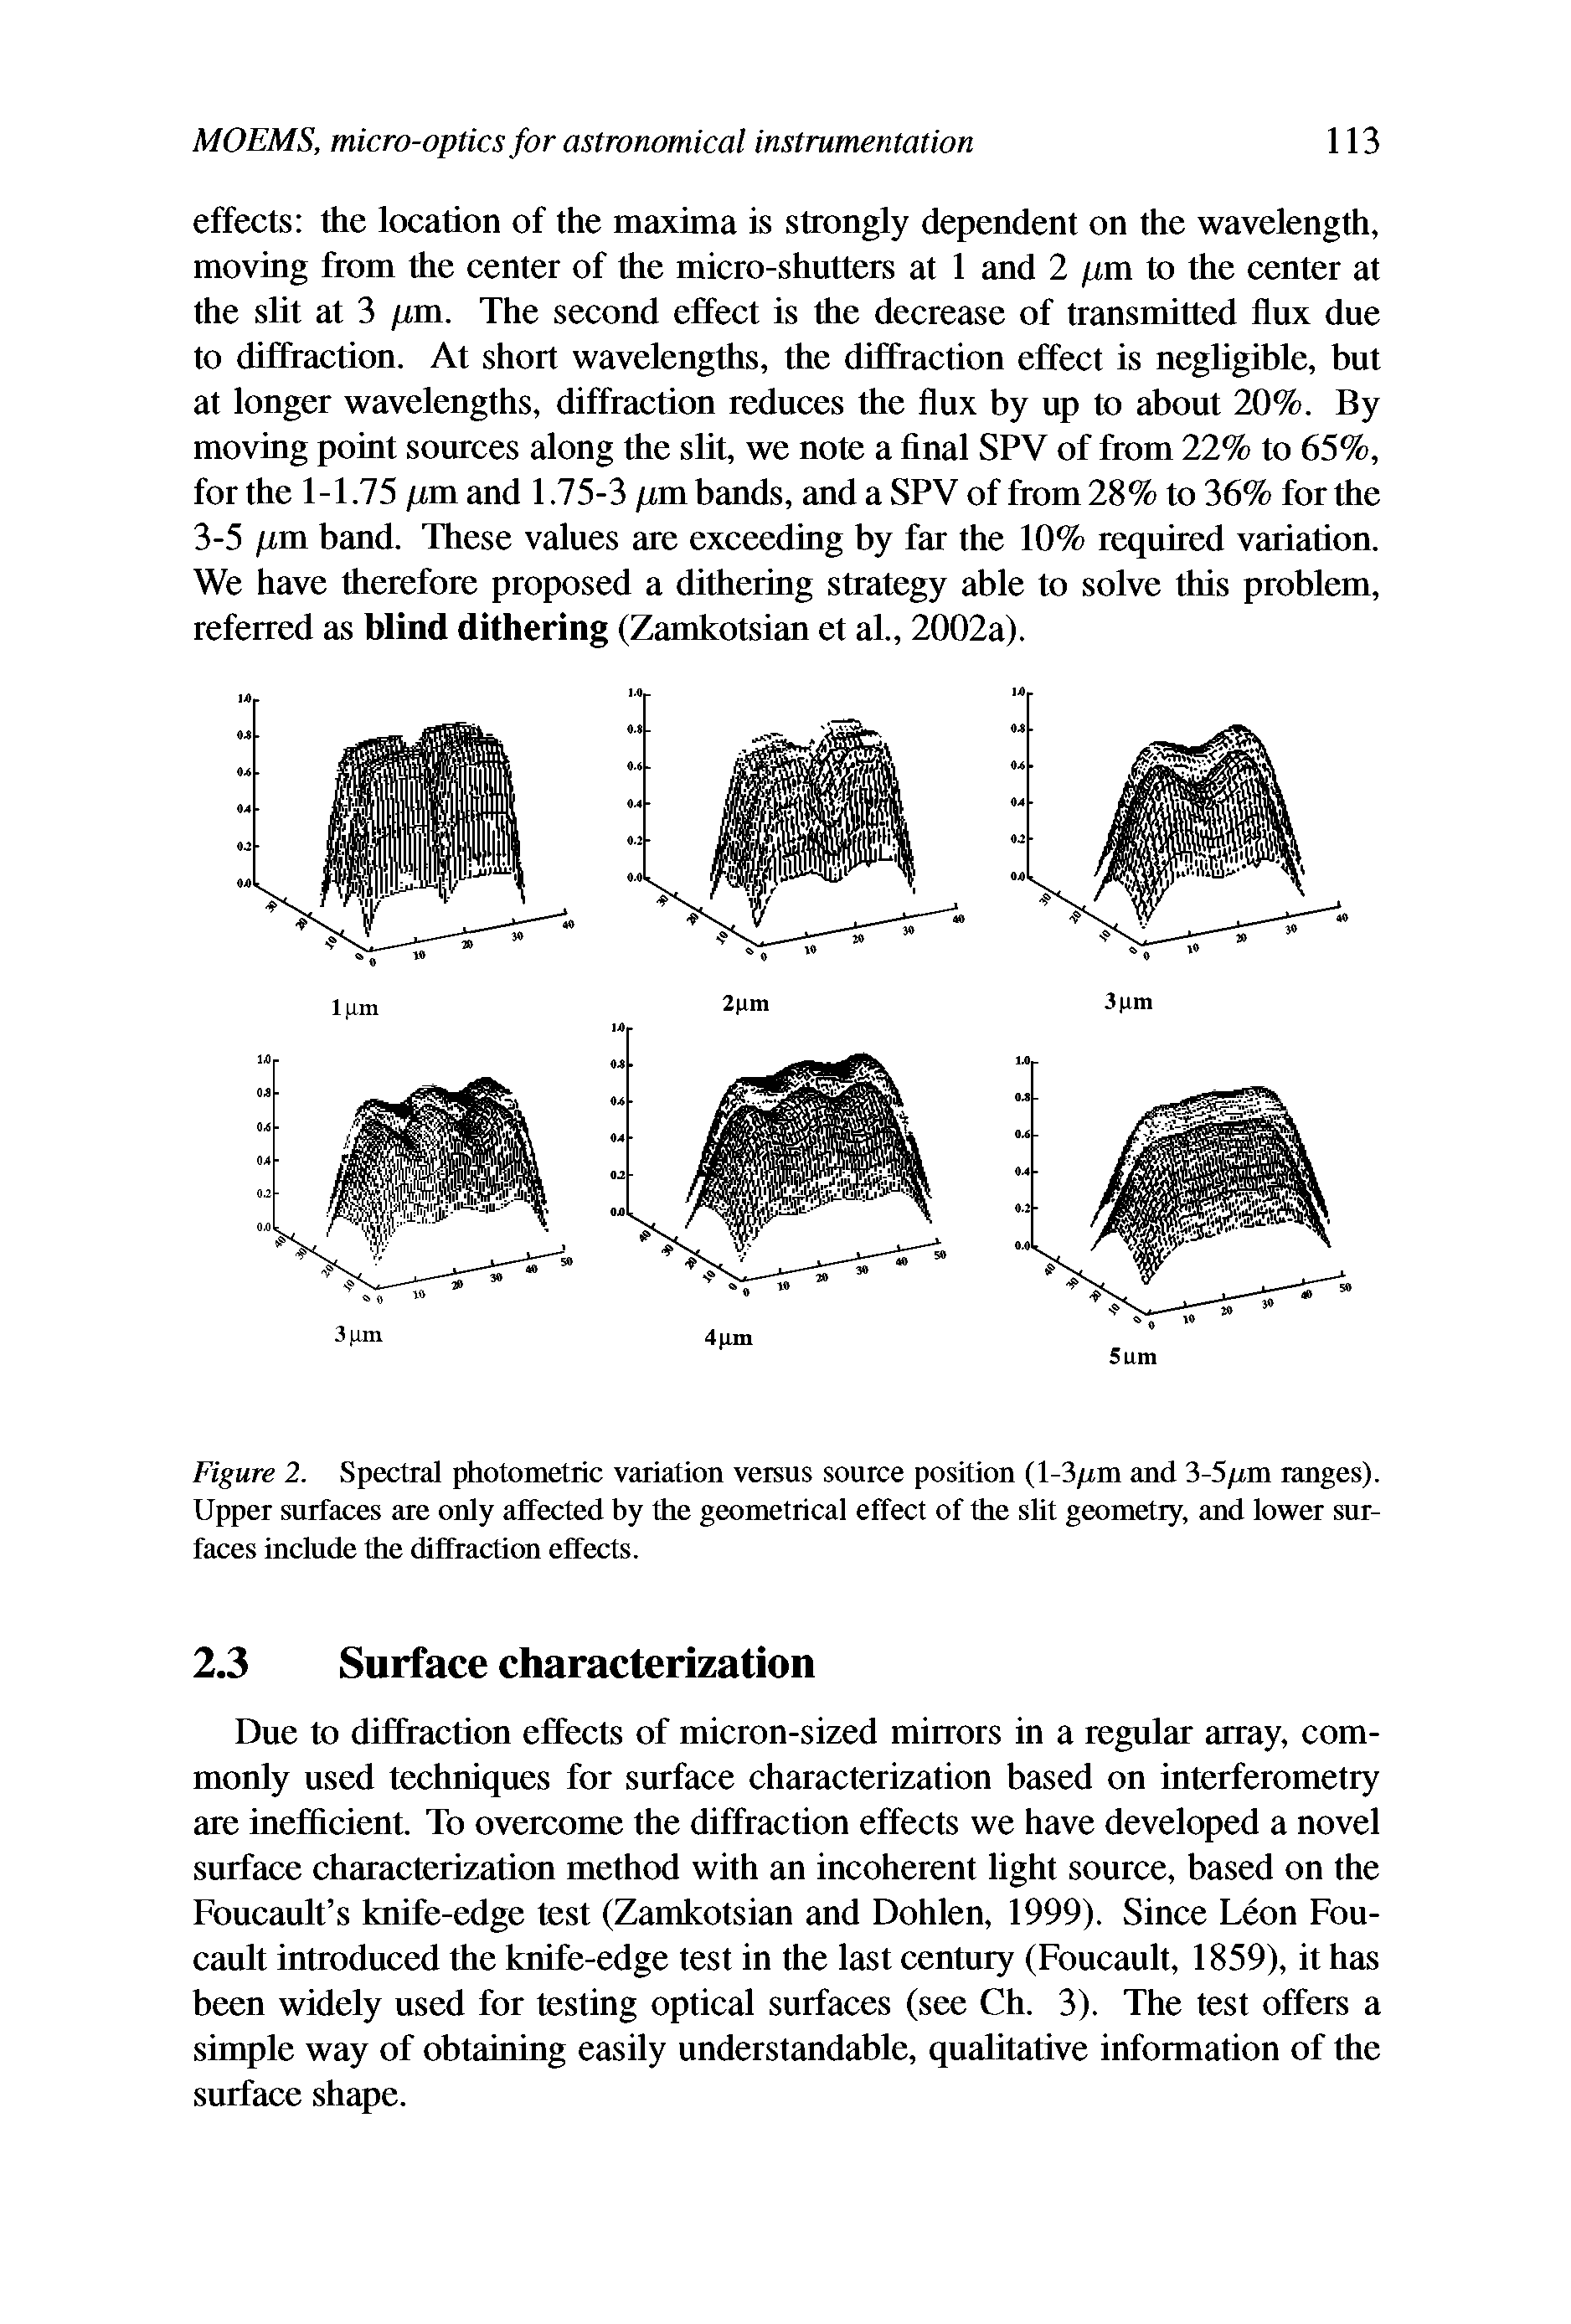 Figure 2. Spectral photometric variation versus source position (1-3/im and 3-5/rm ranges). Upper surfaces are only affected by the geometrical effect of the slit geometry, and lower surfaces include the diffraction effects.